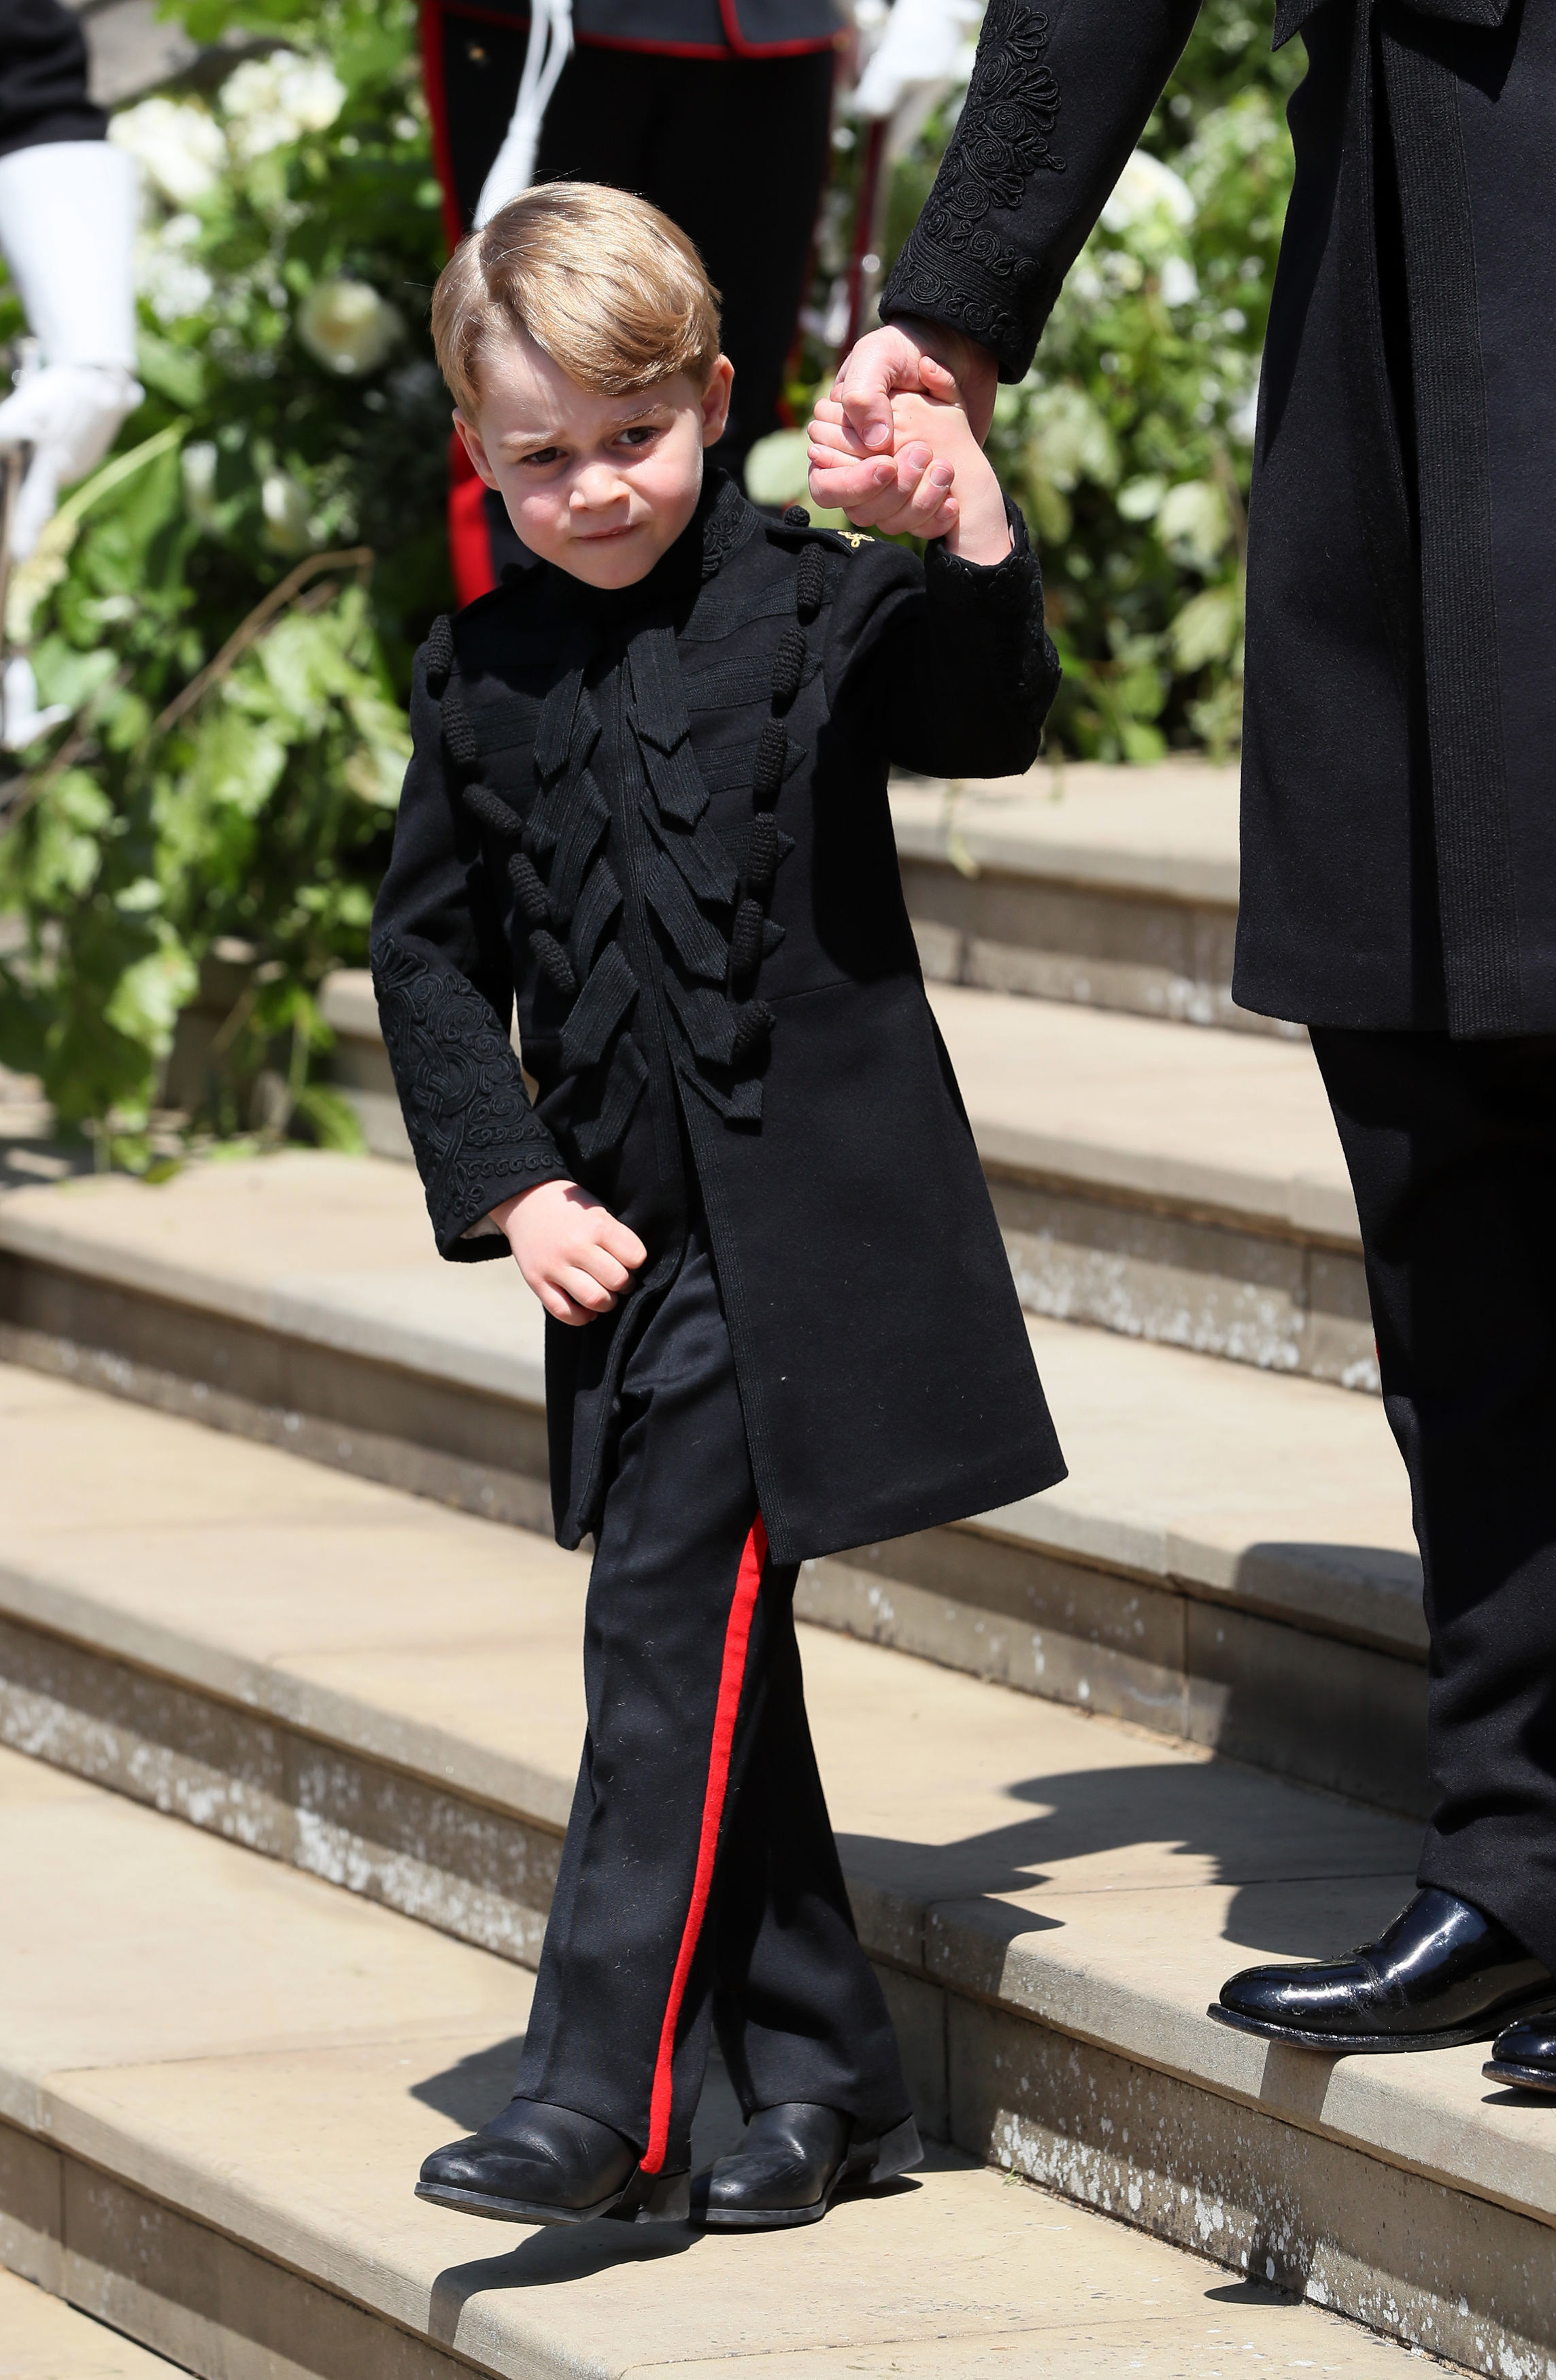 <p>Prince George looked smart in his pageboy uniform after <a href="https://www.wonderwall.com/celebrity/photos/prince-harry-meghan-markle-married-royal-wedding-england-all-best-photos-3014346.gallery">the royal wedding</a> of uncle <a href="https://www.wonderwall.com/celebrity/profiles/overview/prince-harry-481.article">Prince Harry</a> and Meghan Markle at St. George's Chapel at Windsor Castle on May 19, 2018.</p>